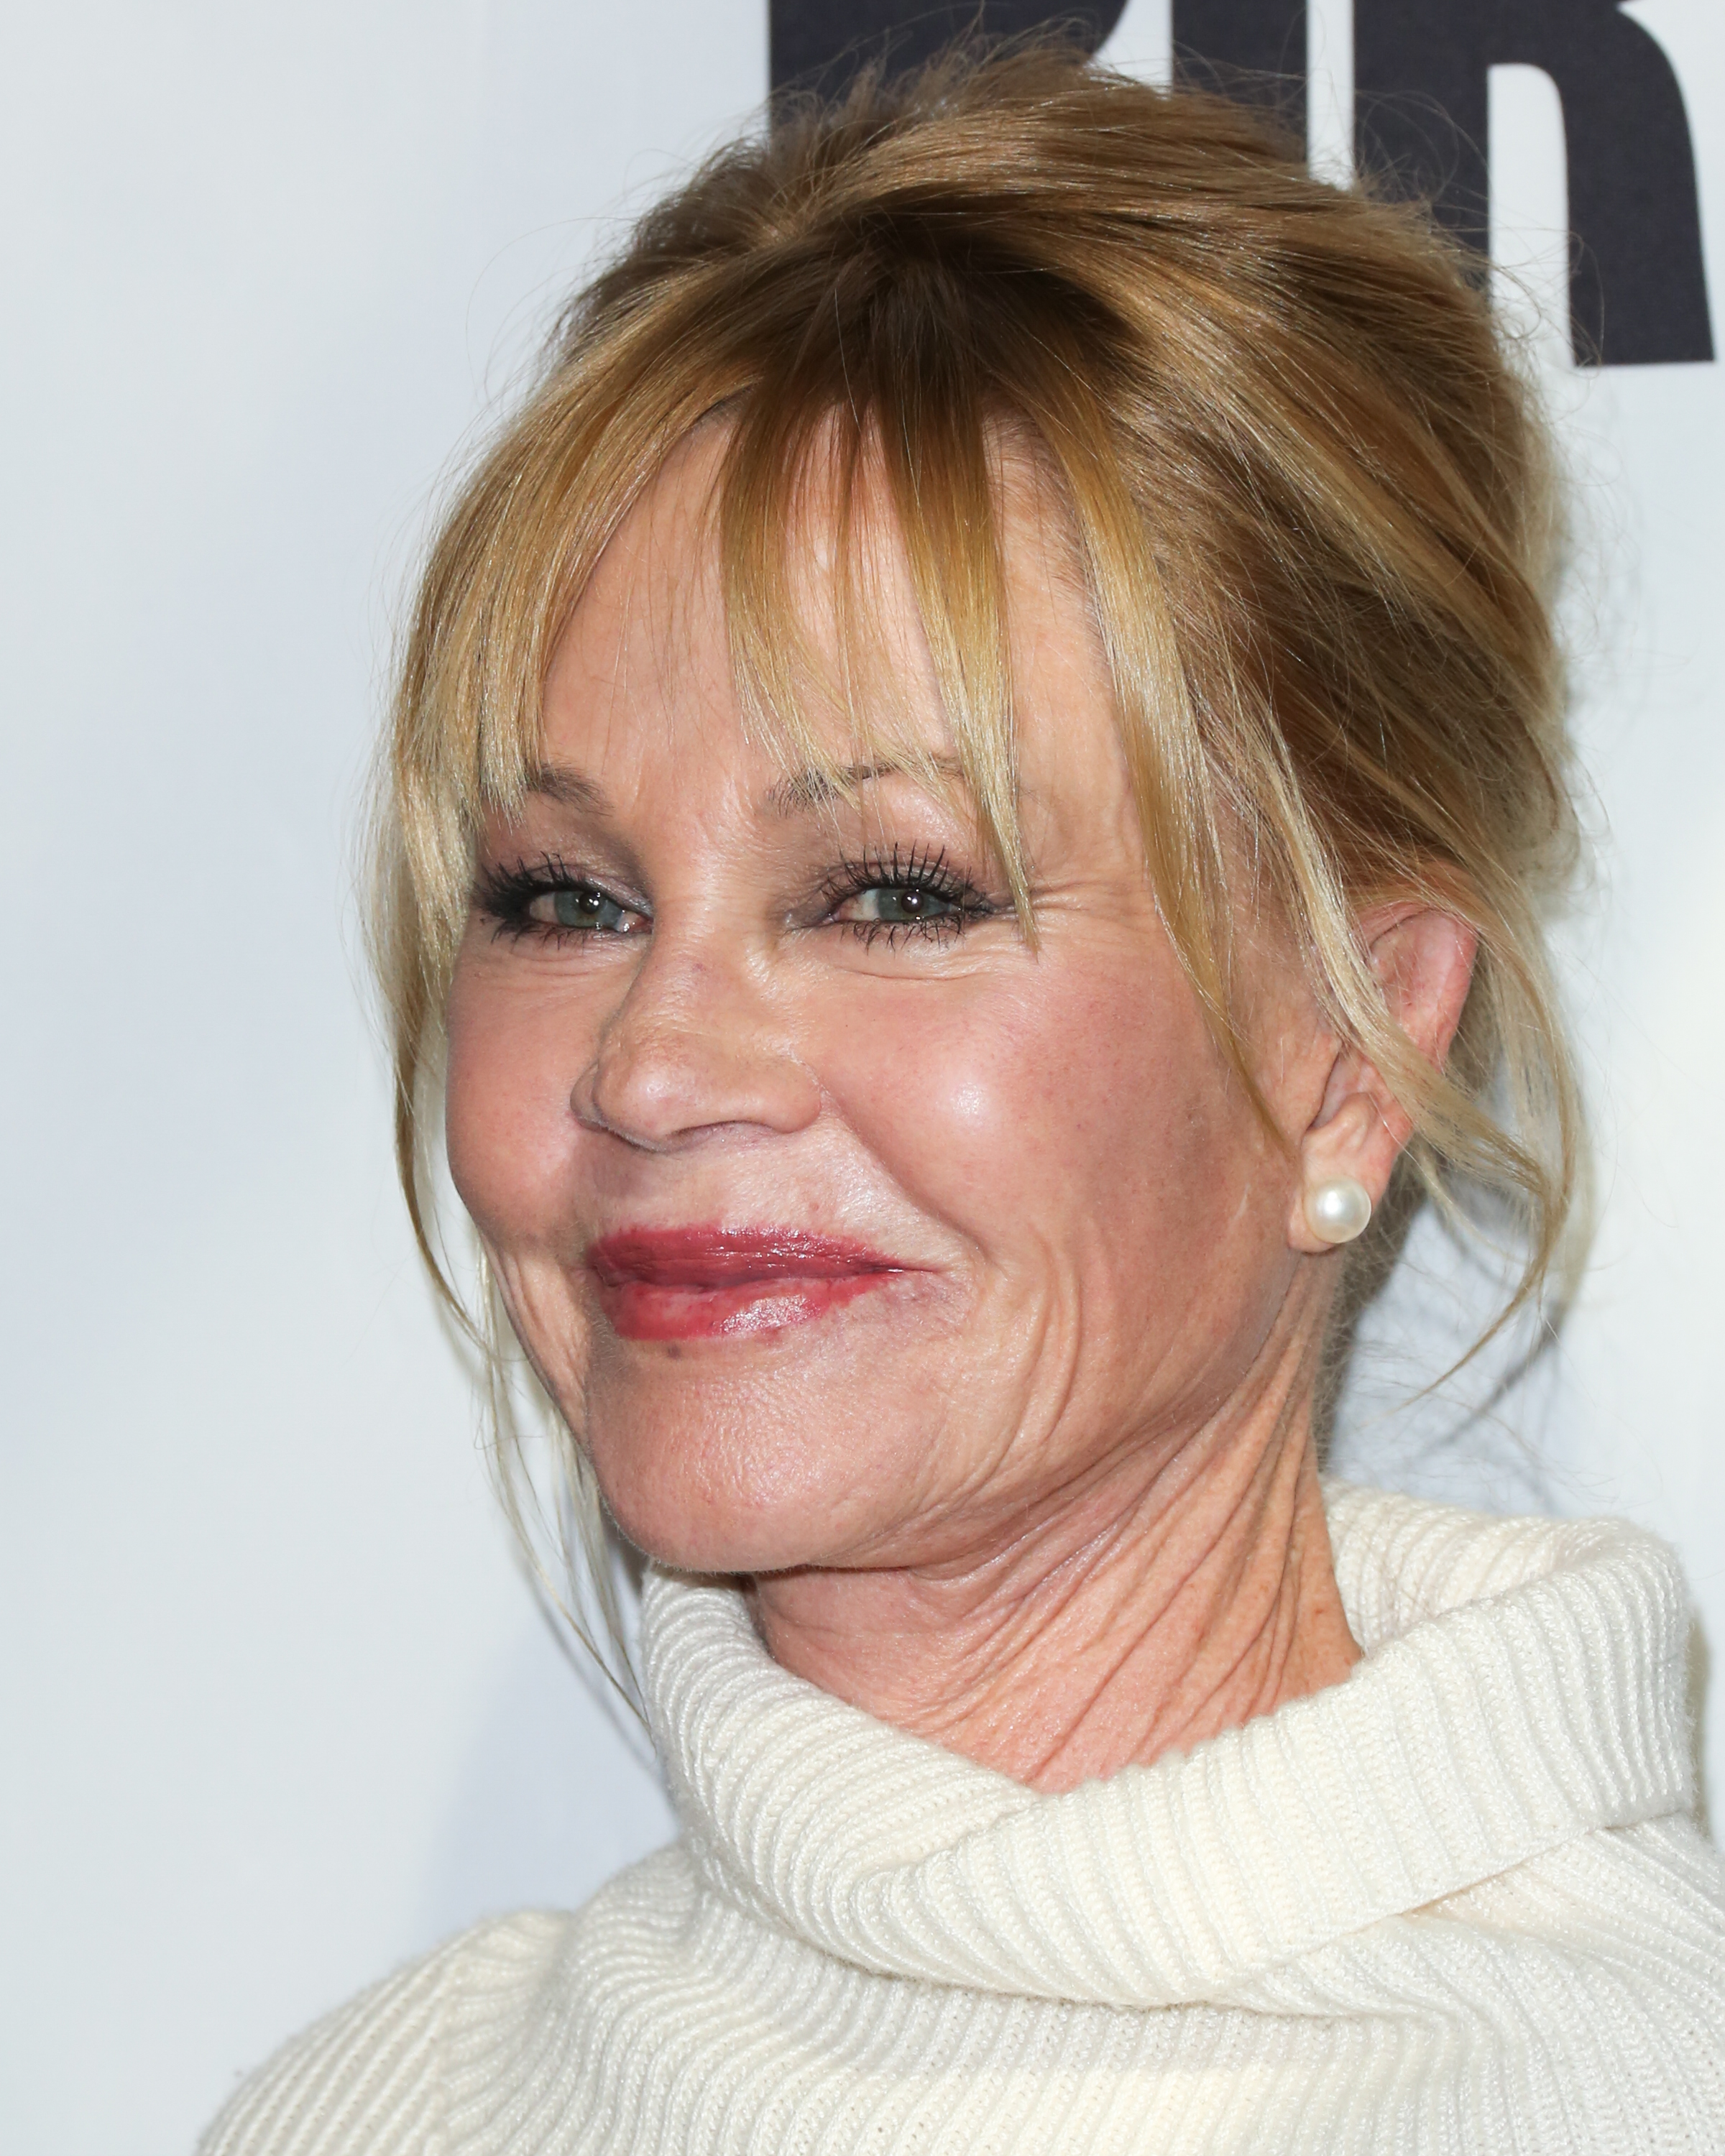 Melanie Griffith at the premiere of "The Pirates Of Somalia" on December 6, 2017, in Hollywood, California. | Source: Getty Images